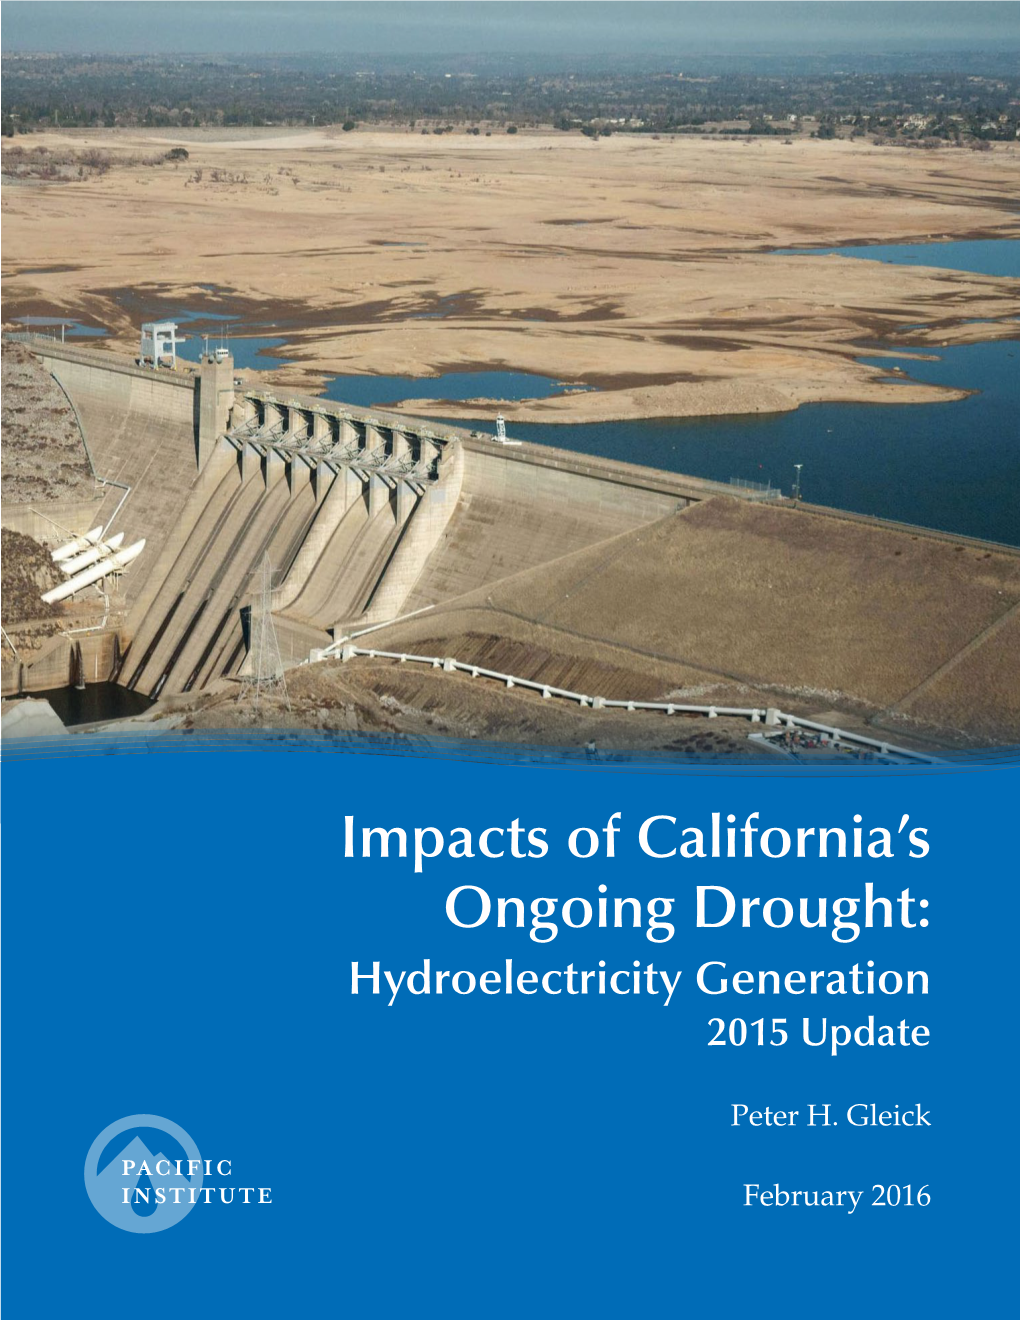 Impacts of California's Ongoing Drought